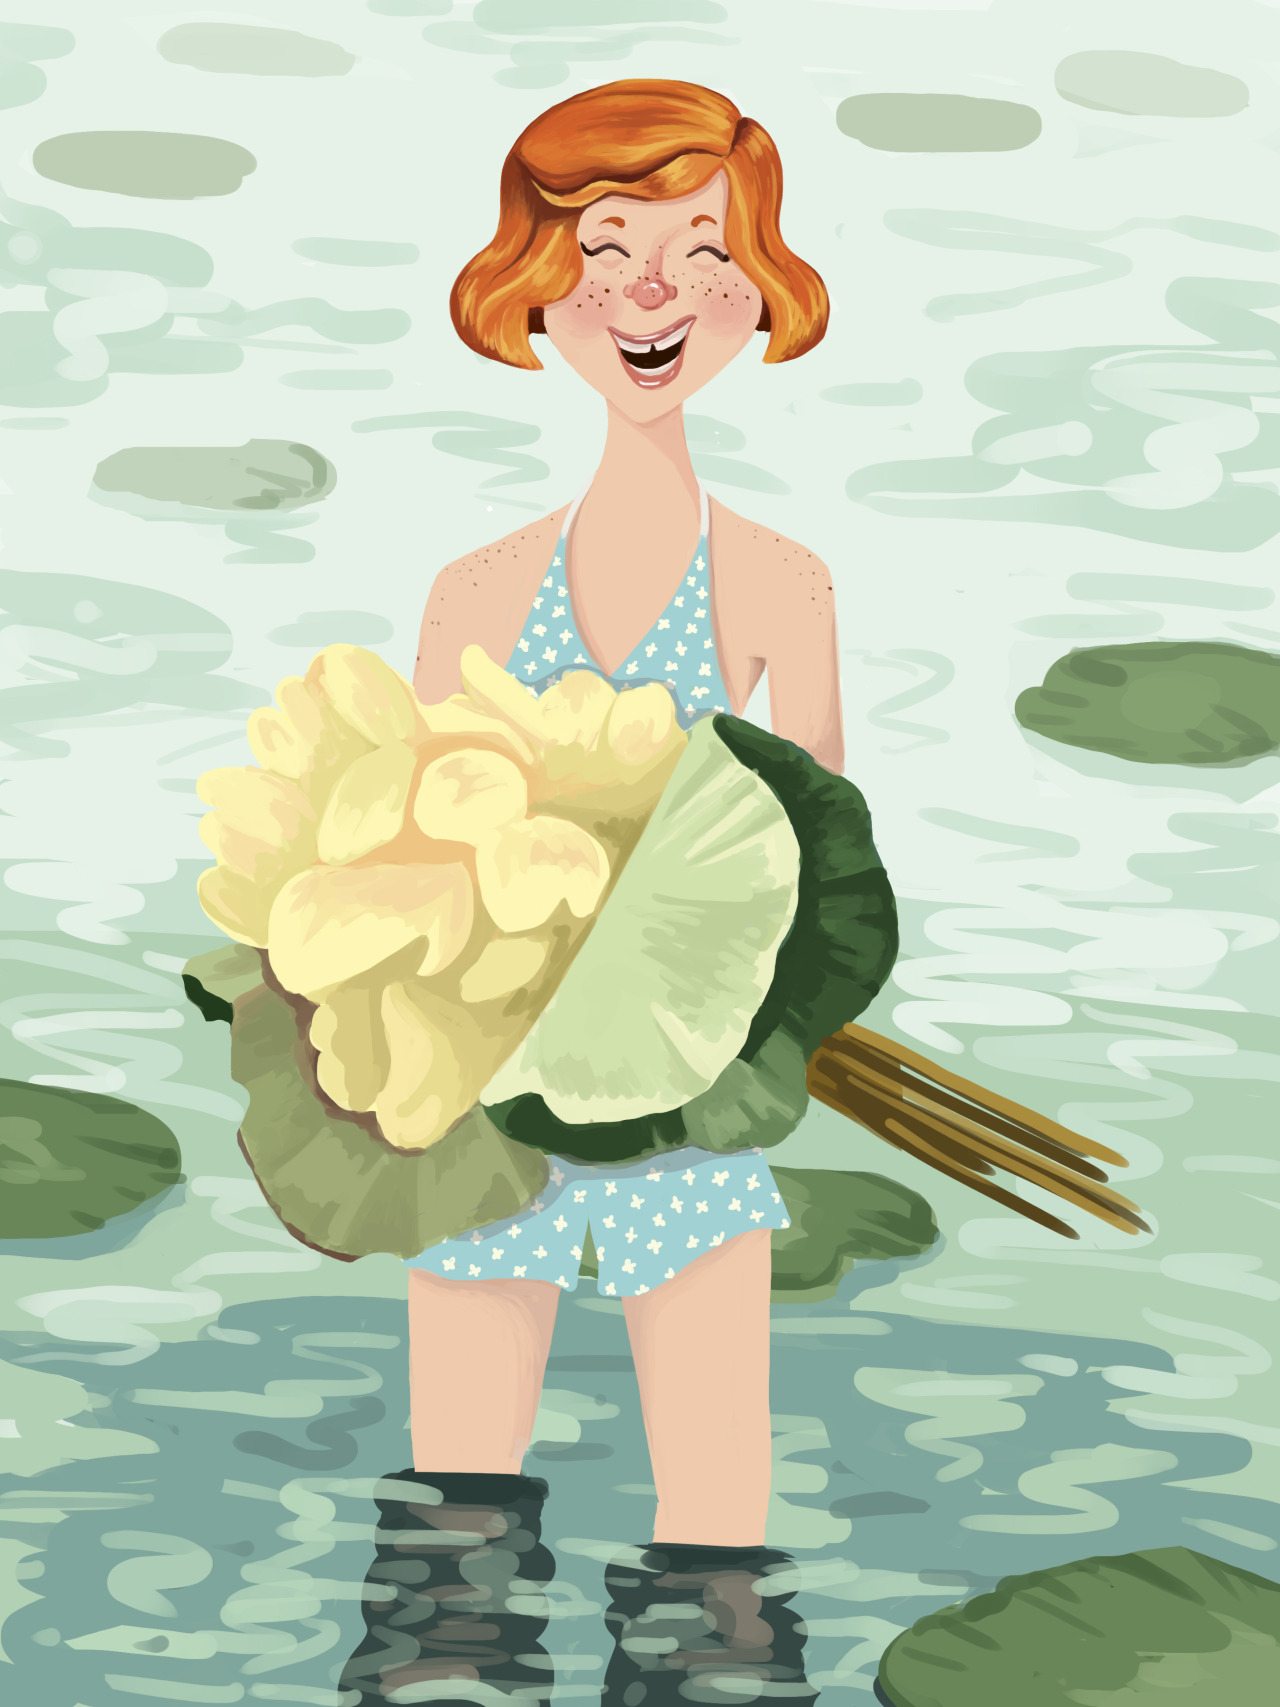 Fun with lilypads! (Dreaming of summertime) While you’re looking, take a gander at some of my other stuff! : http://colleen-mcnally.tumblr.com/